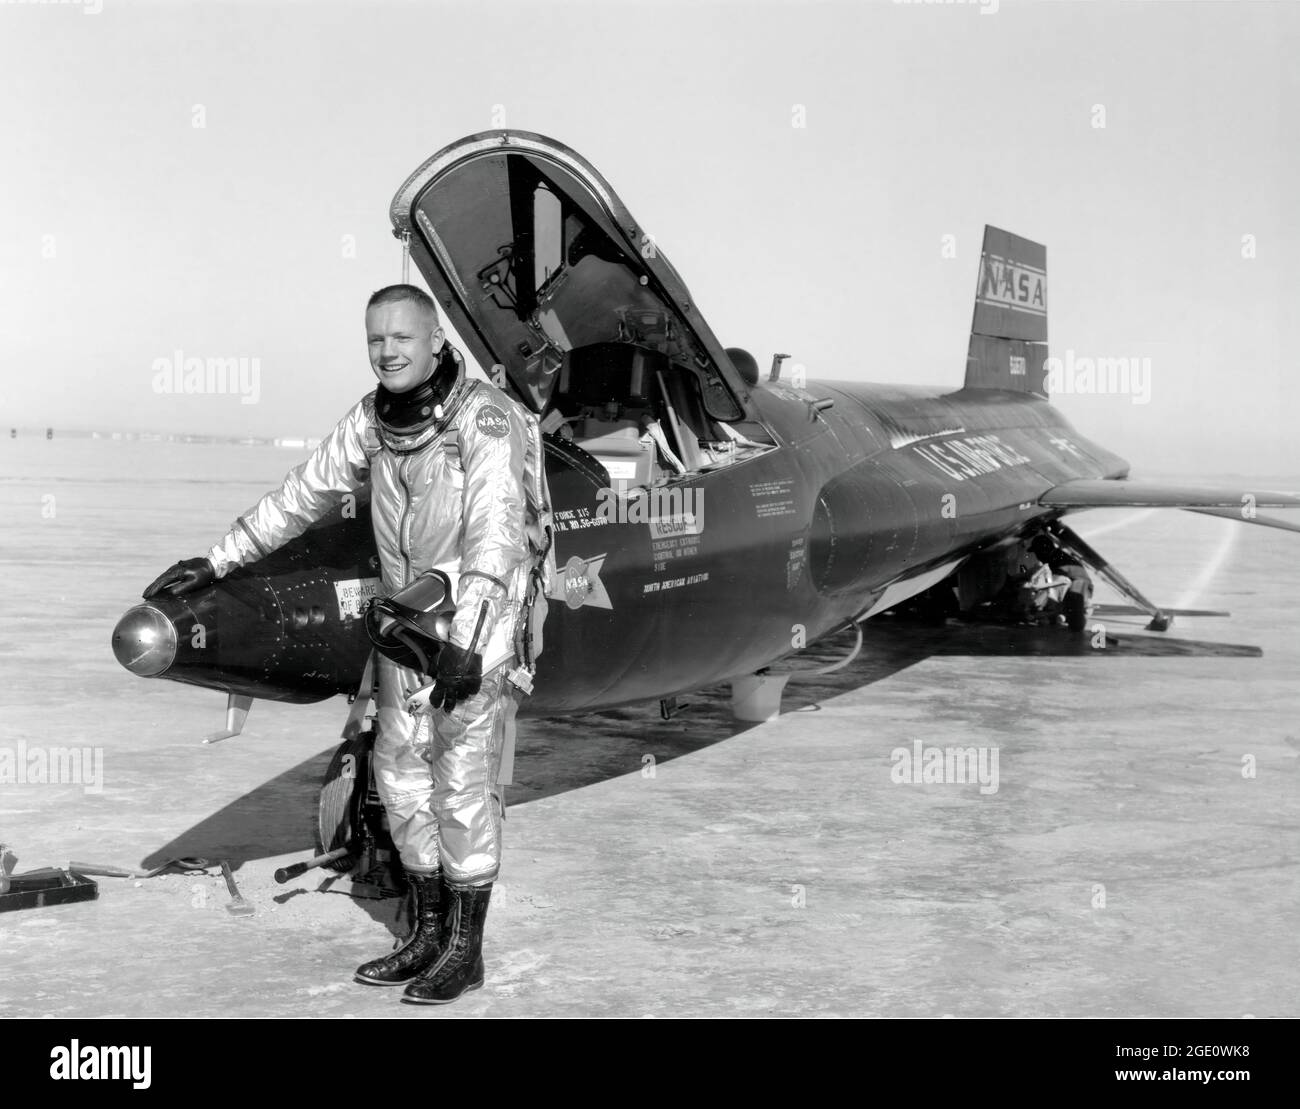 Dryden pilot Neil Armstrong is seen here next to the X-15 ship #1 (56-6670) after a research flight. The X-15 was a rocket-powered aircraft 50 feet long with a wingspan of 22 feet. It was a missile-shaped vehicle with an unusual wedge-shaped vertical tail, thin stubby wings, and unique side fairings that extended along the side of the fuselage. The X-15 was flown over a period of nearly 10 years, from June 1959 to October 1968. It set the world's unofficial speed and altitude records. Information gained from the highly successful X-15 program contributed to the development of the Mercury. Stock Photo